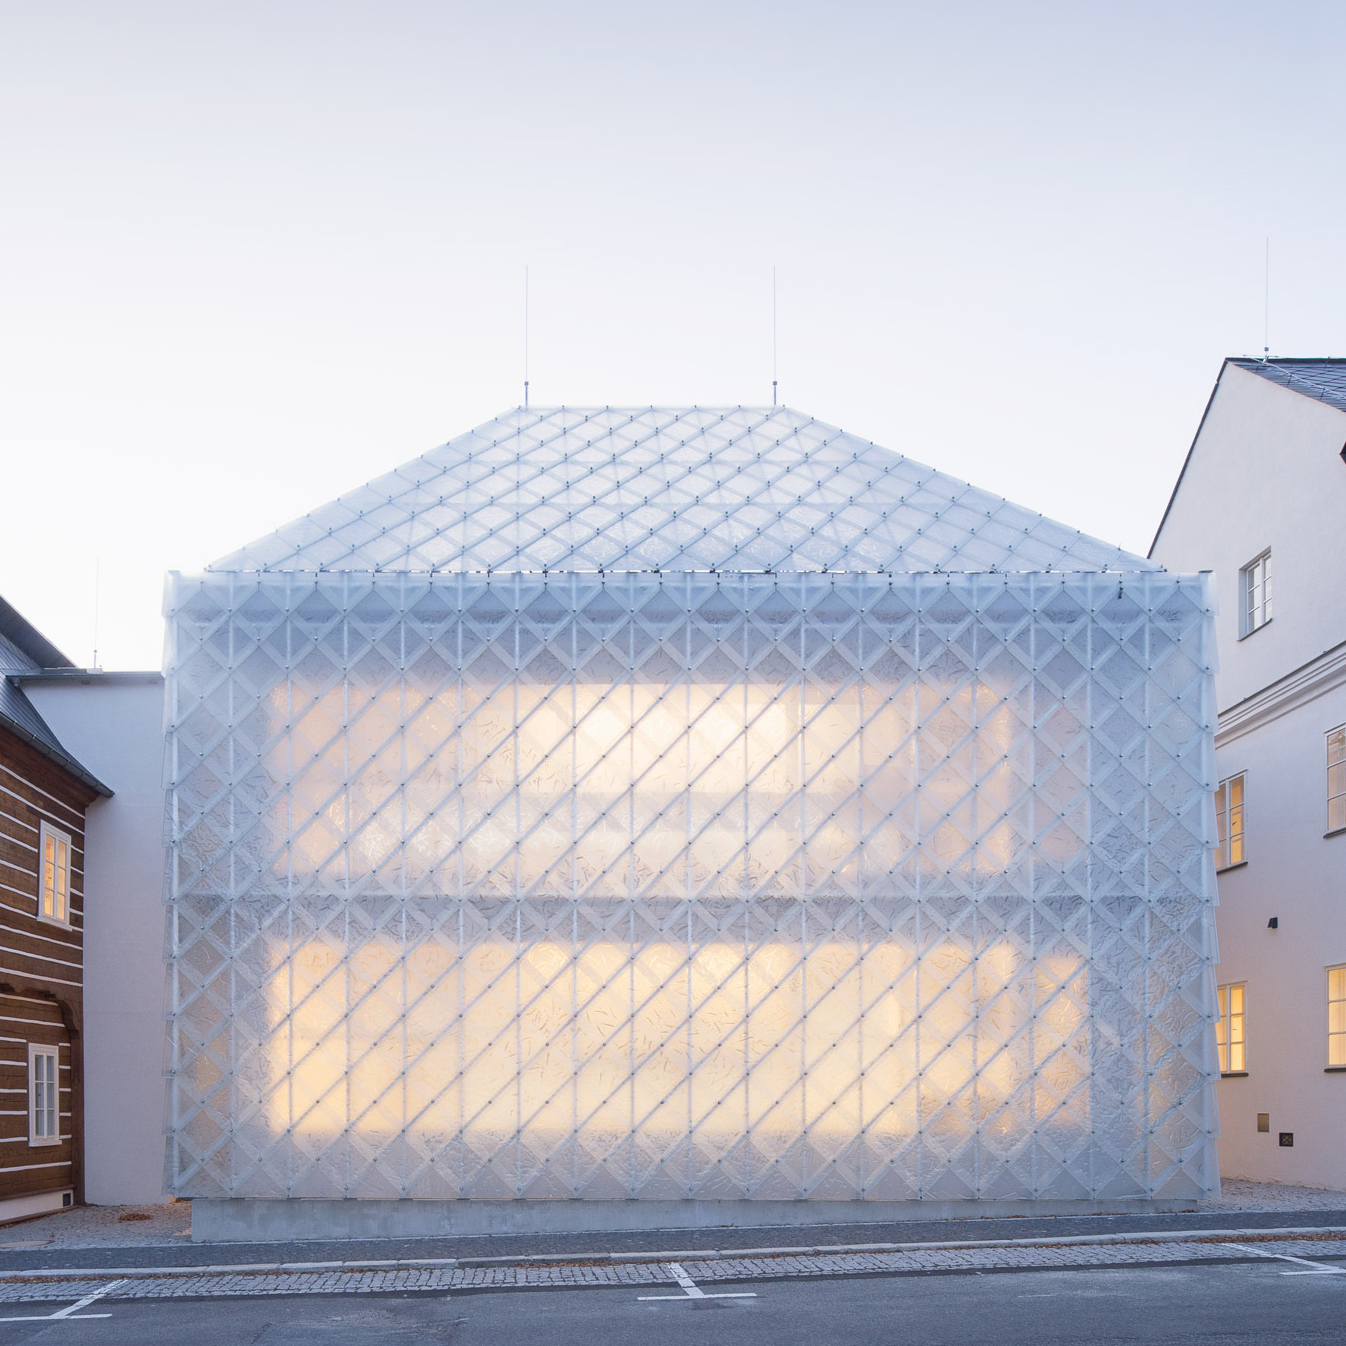 Frosted glass exterior of Lasvit headquarters by Ov-a Architekti